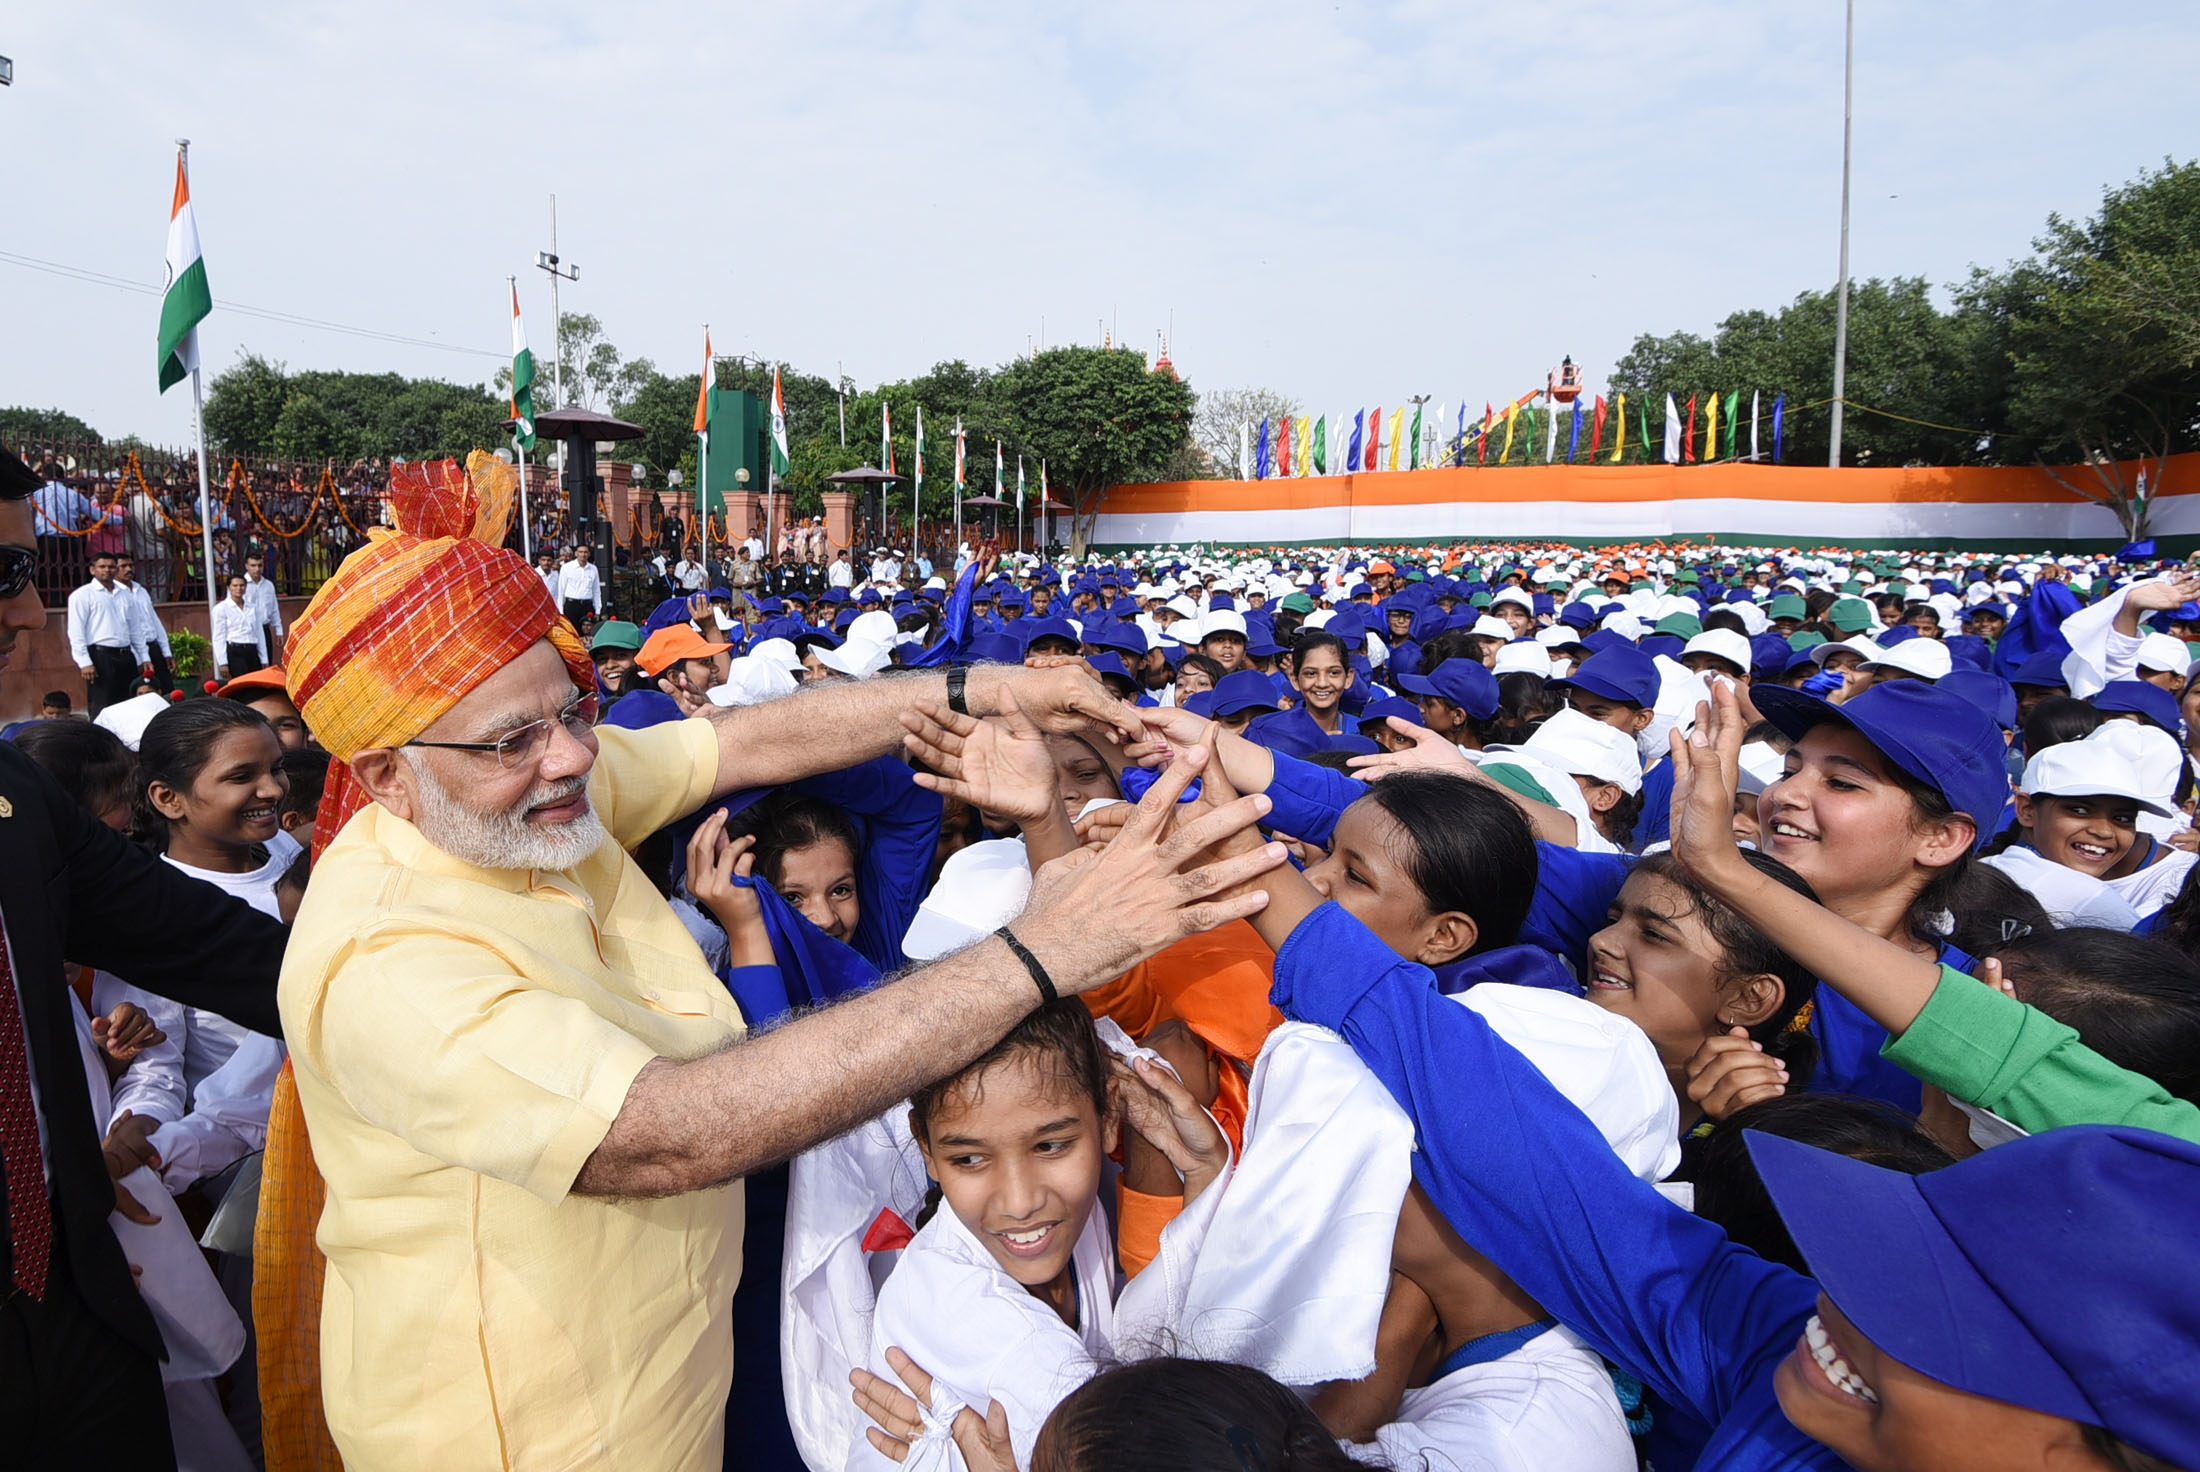 The_Prime_Minister,_Shri_Narendra_Modi_interacting_with_the_school_children_after_addressing_the_Nation,_on_the_occasion_of_71st_Independence_Day_from_the_ramparts_of_Red_Fo